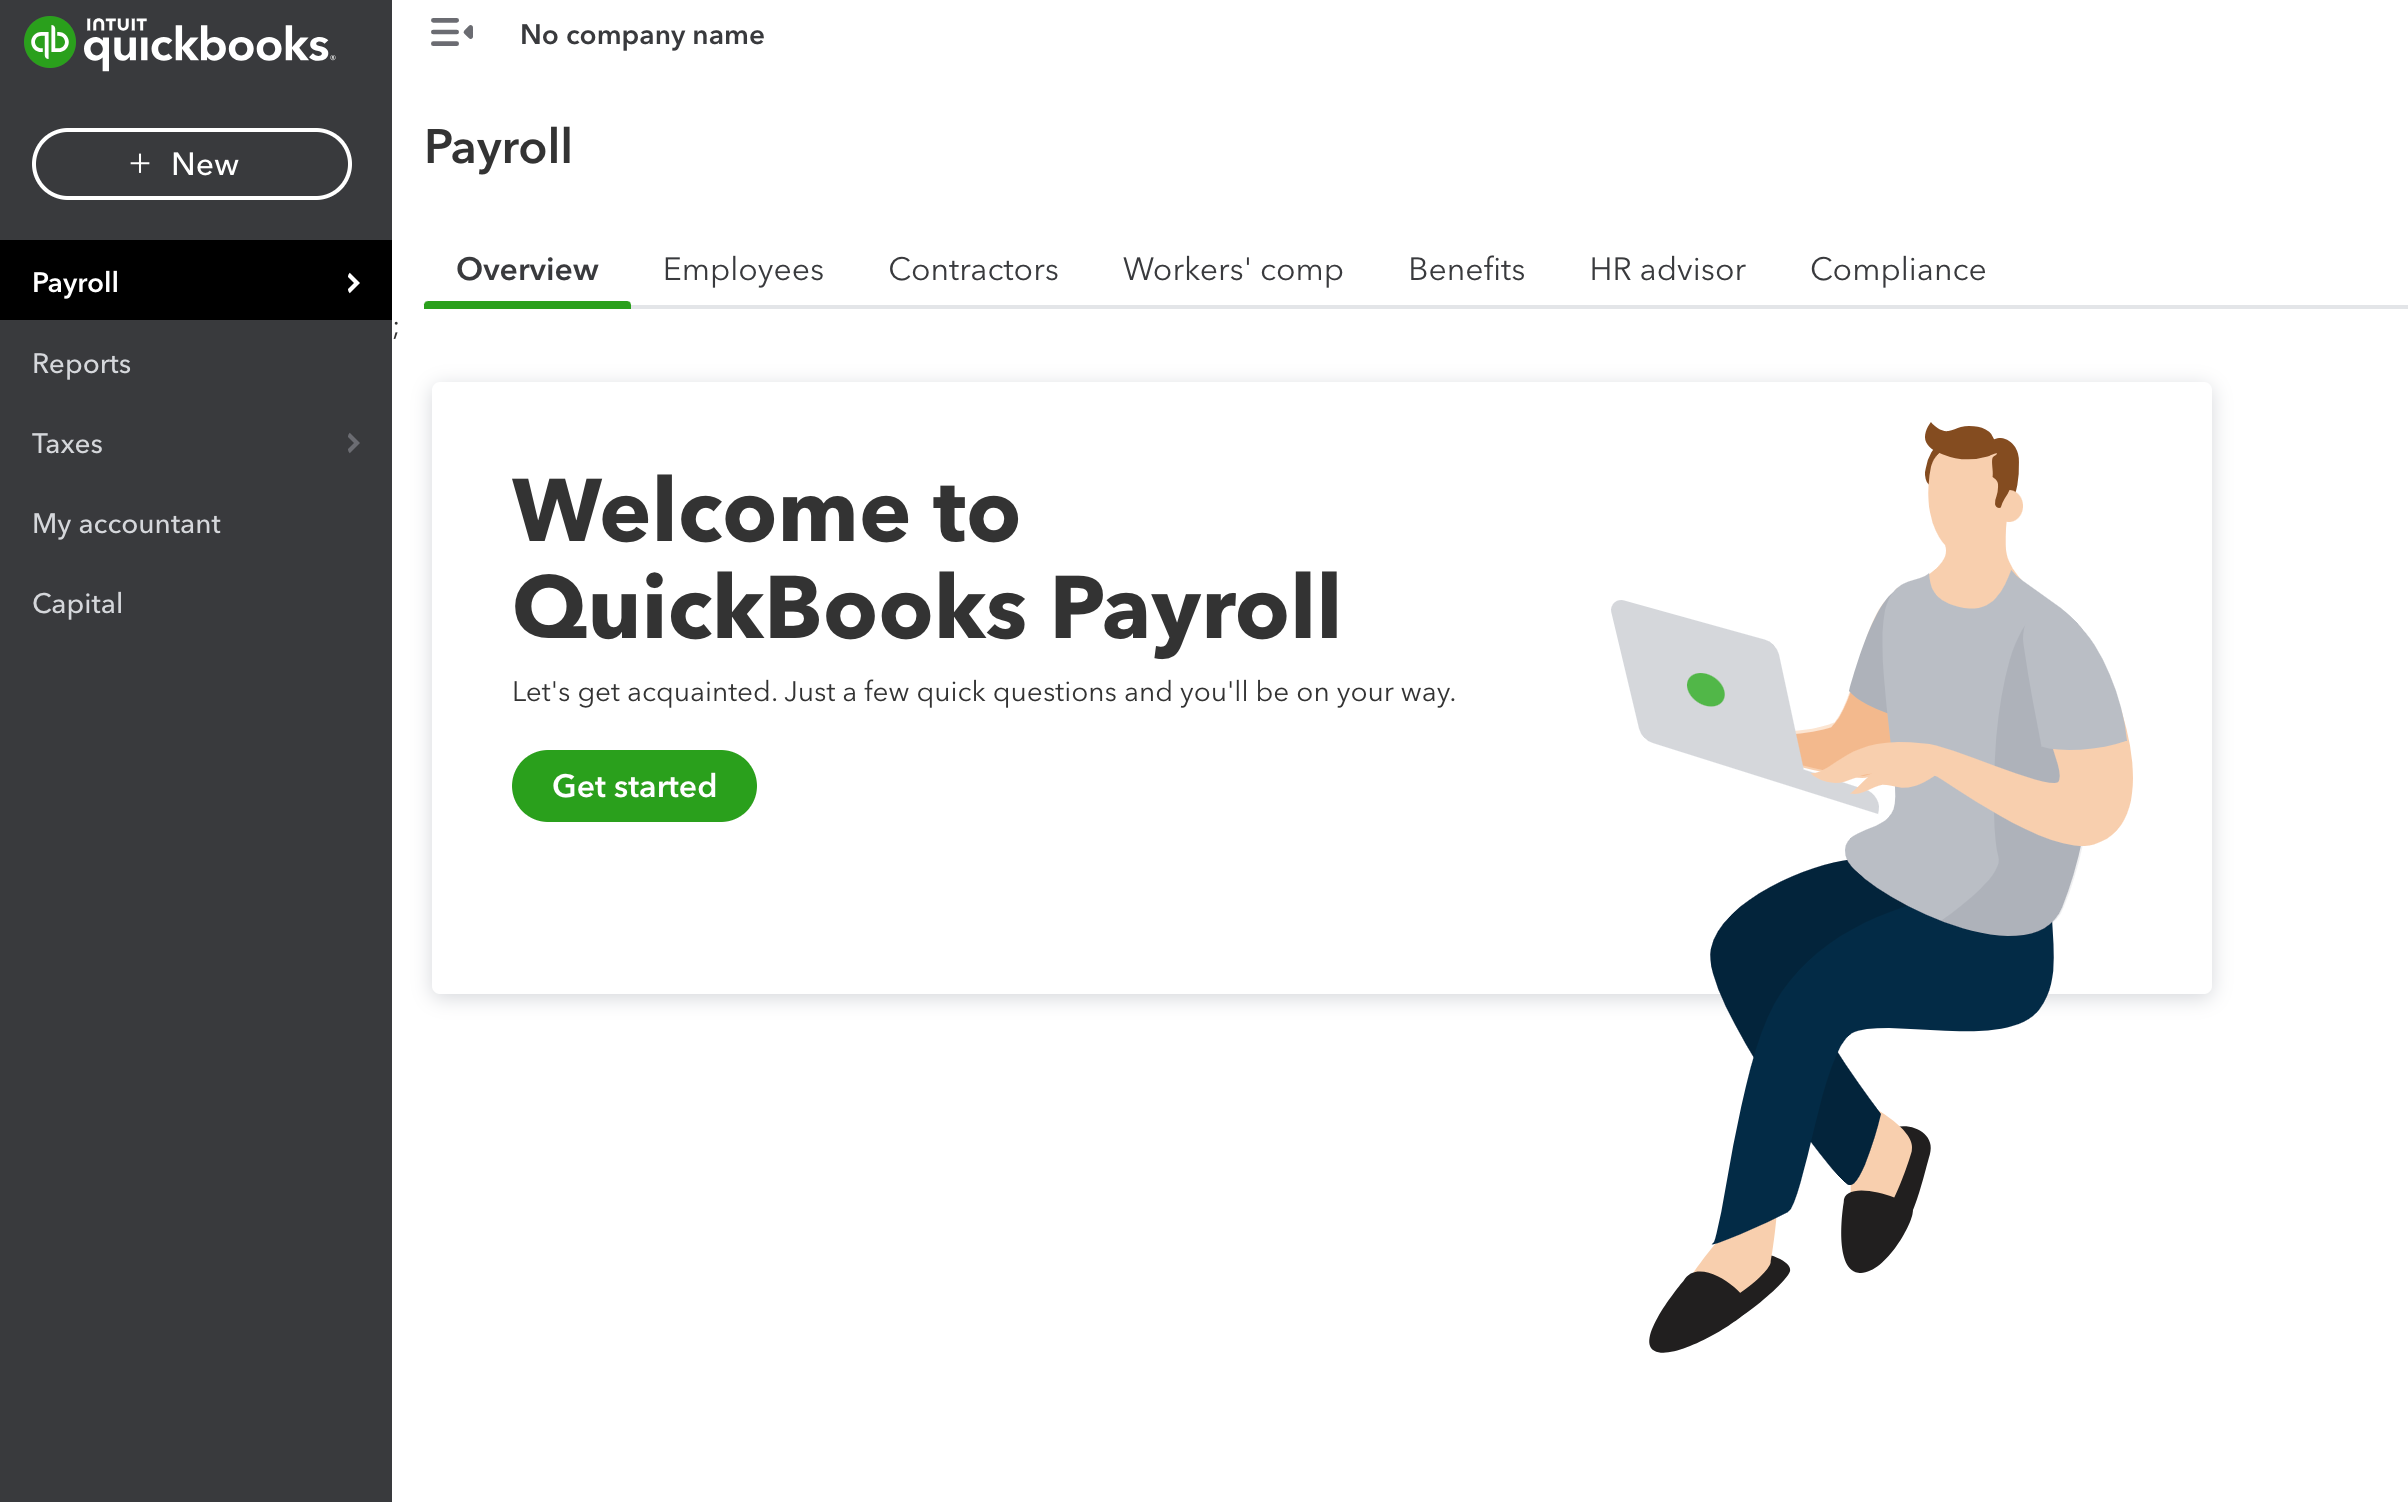 Once you set up your business in QuickBooks Payroll, you can pay employees, sync payroll data with your QuickBooks Online account and get HR assistance (with certain plans).